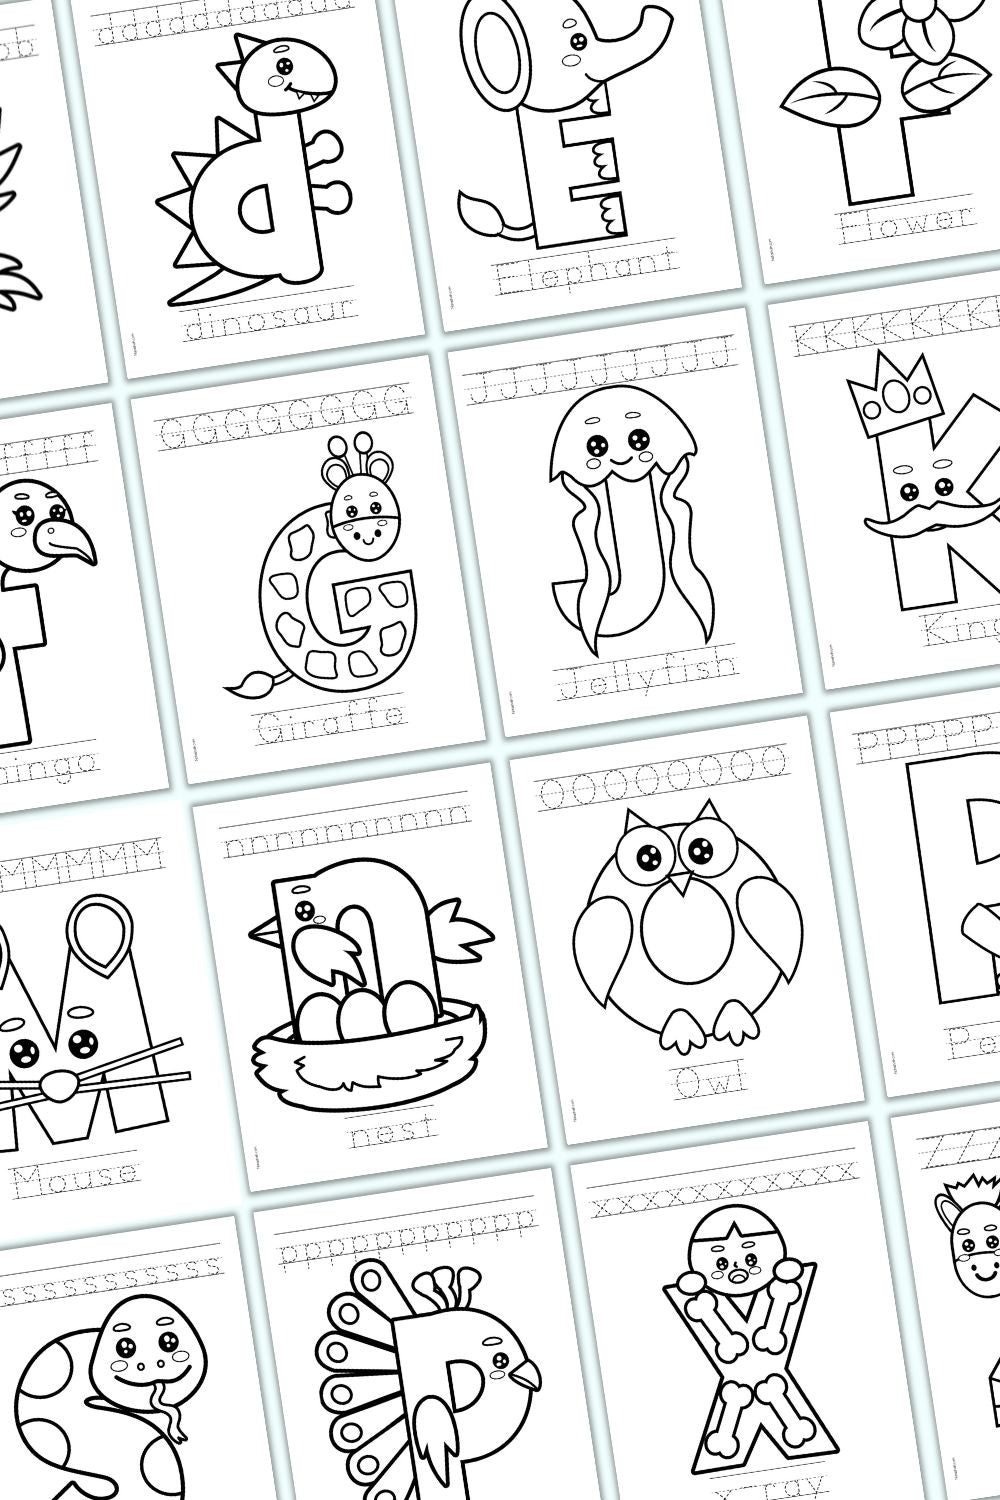 Fall Alphabet Tracing & Coloring Pack – The Artisan Life